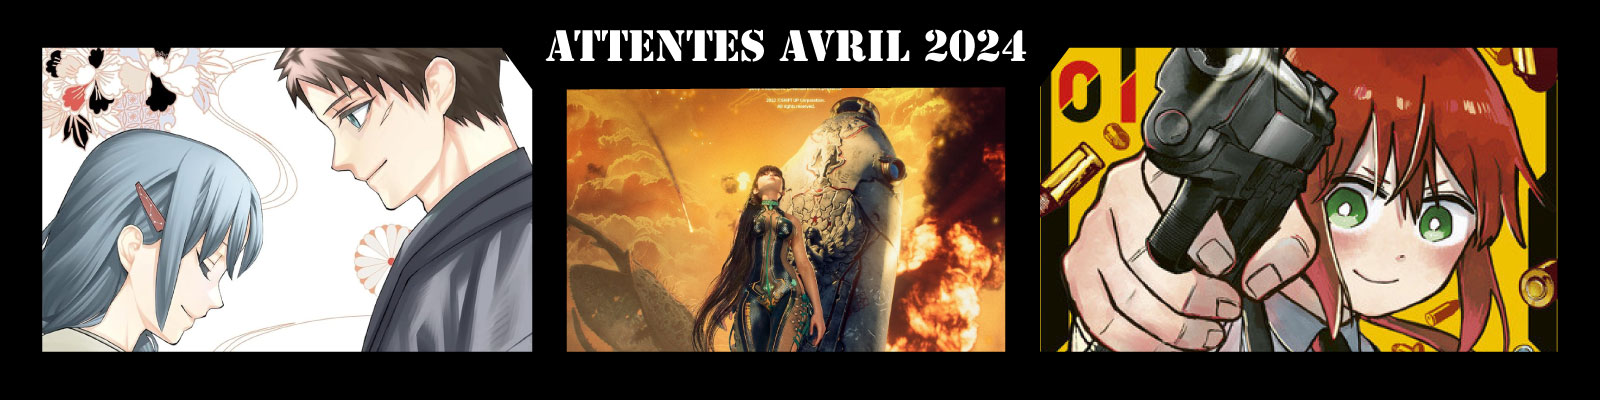 Attentes-avril 2024-